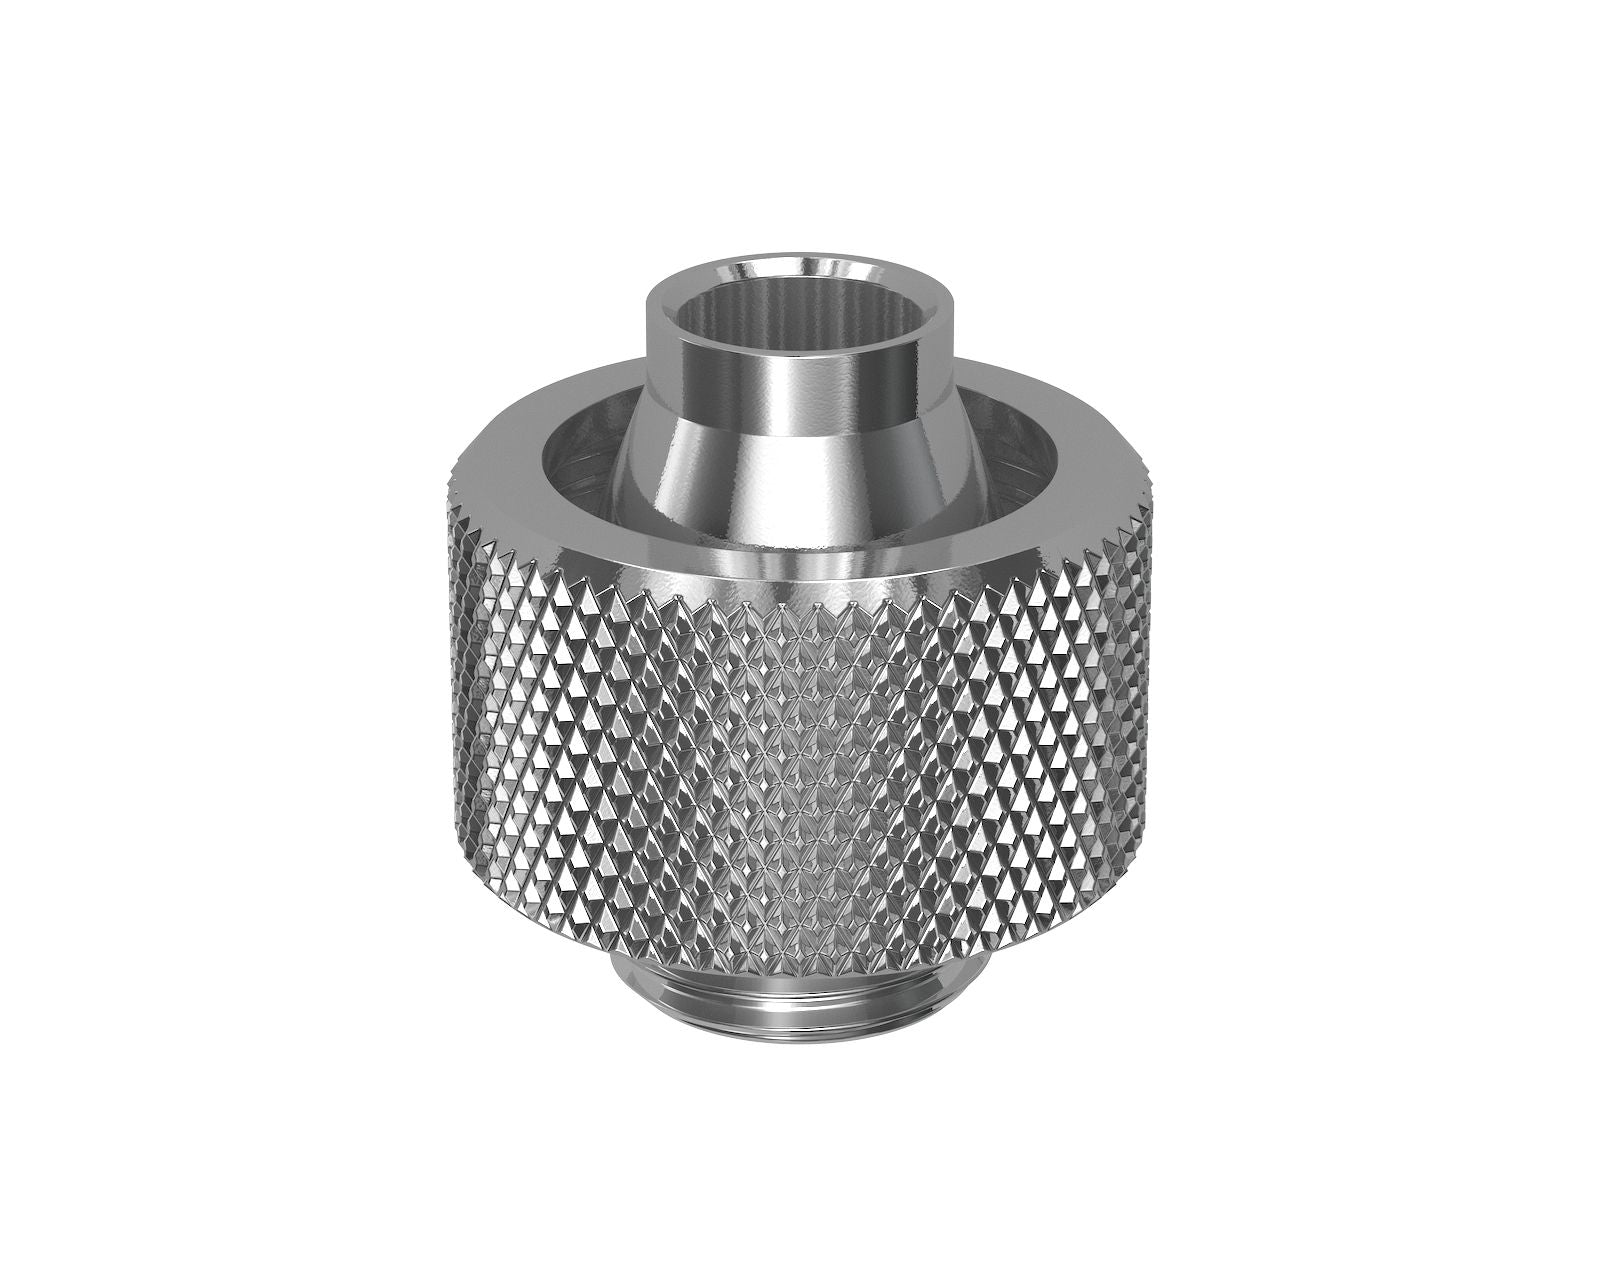 PrimoChill SecureFit SX - Premium Compression Fitting For 7/16in ID x 5/8in OD Flexible Tubing (F-SFSX758) - Available in 20+ Colors, Custom Watercooling Loop Ready - Silver Nickel